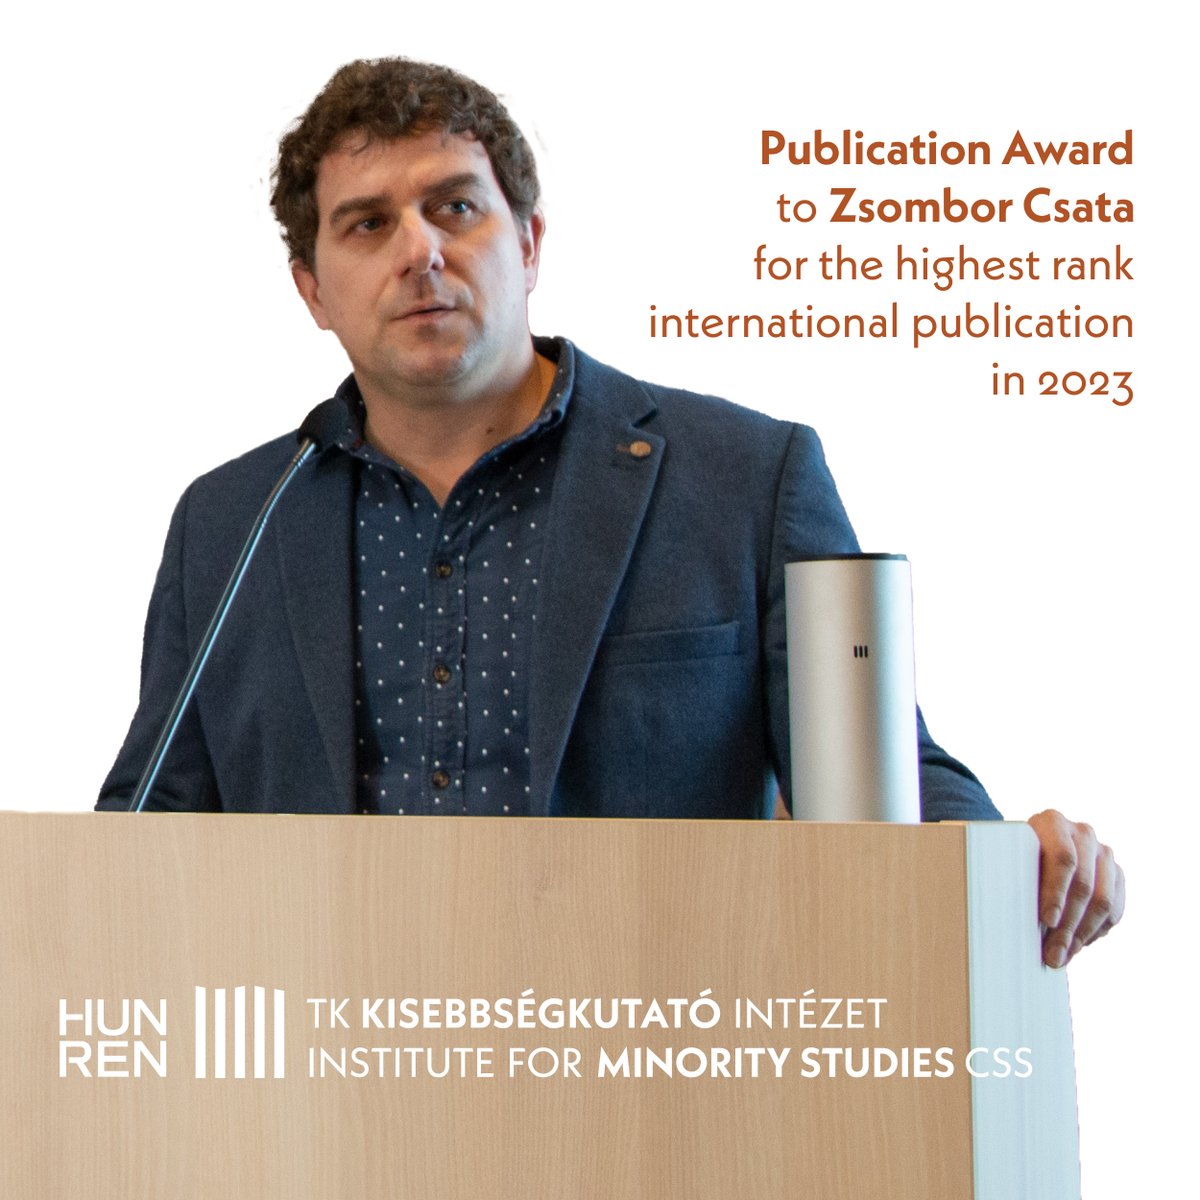 We acknowledge authors of the best publications each year. One award went to Zsombor Csata at Institute for Minority Studies, for his paper published in Journal of Ethnic and Migration Studies, The income effects of minority co-ethnic employment tandfonline.com/doi/full/10.10…